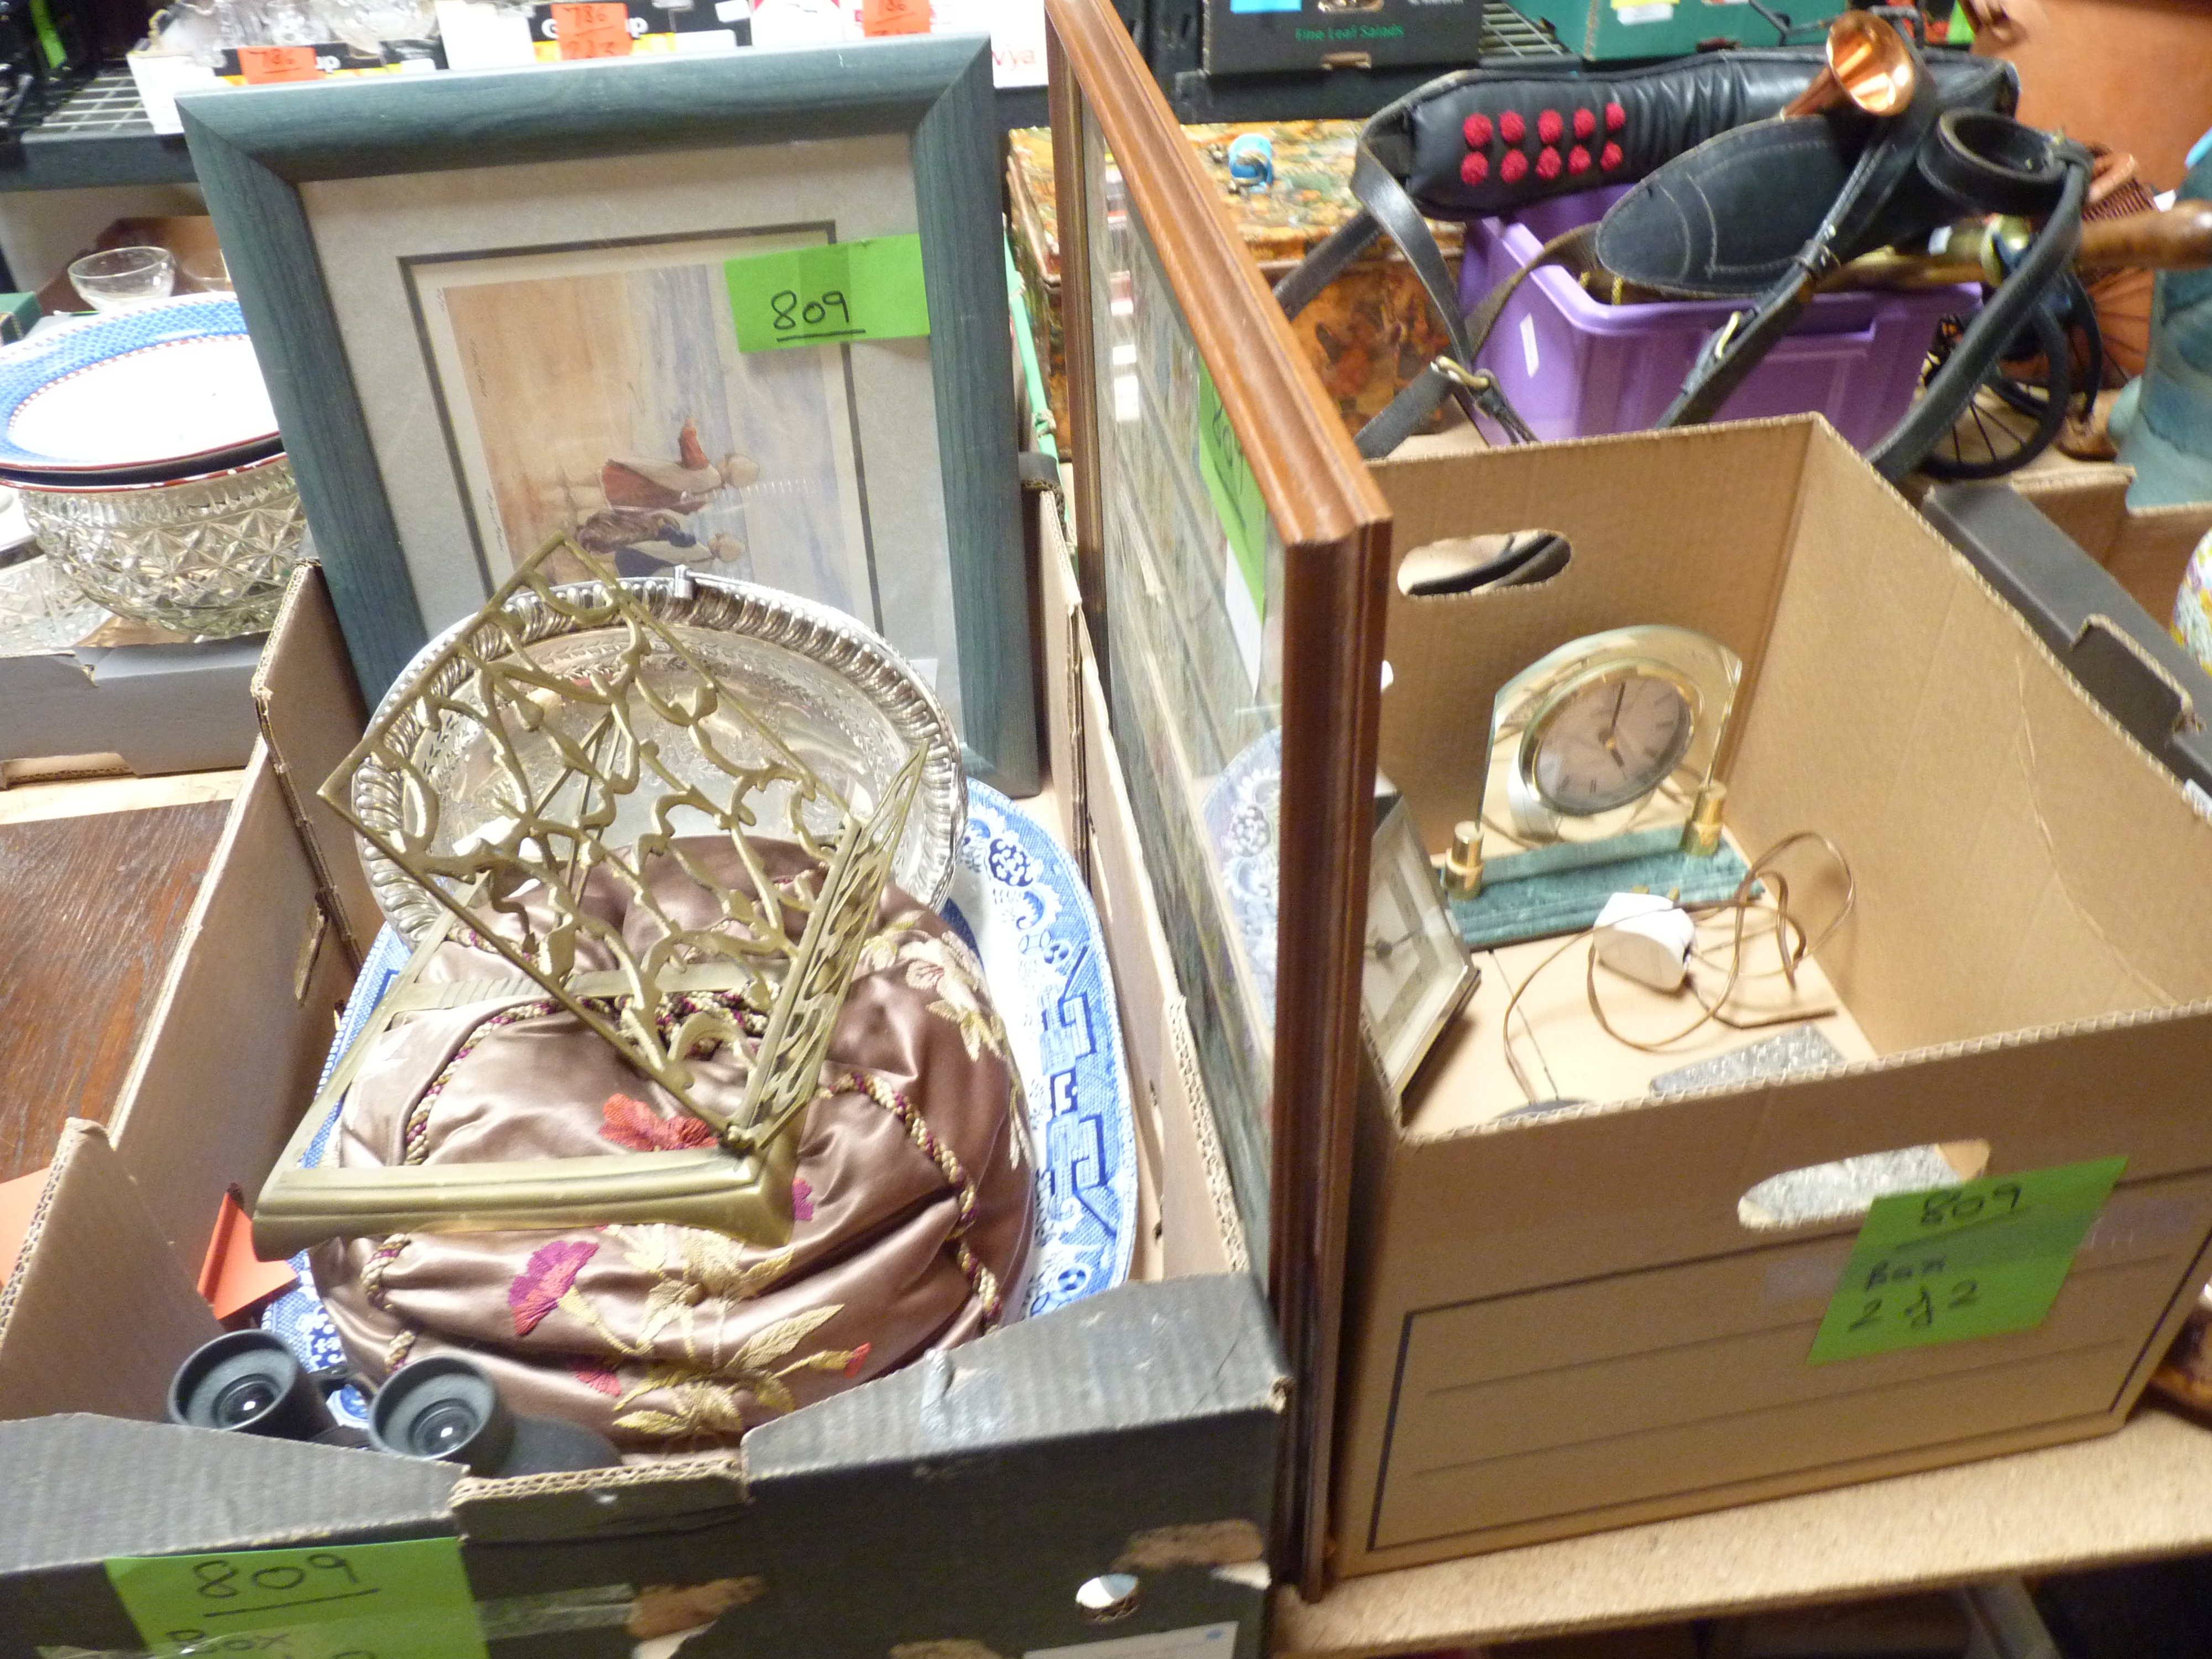 2 boxes, brass , clocks, plated etc.